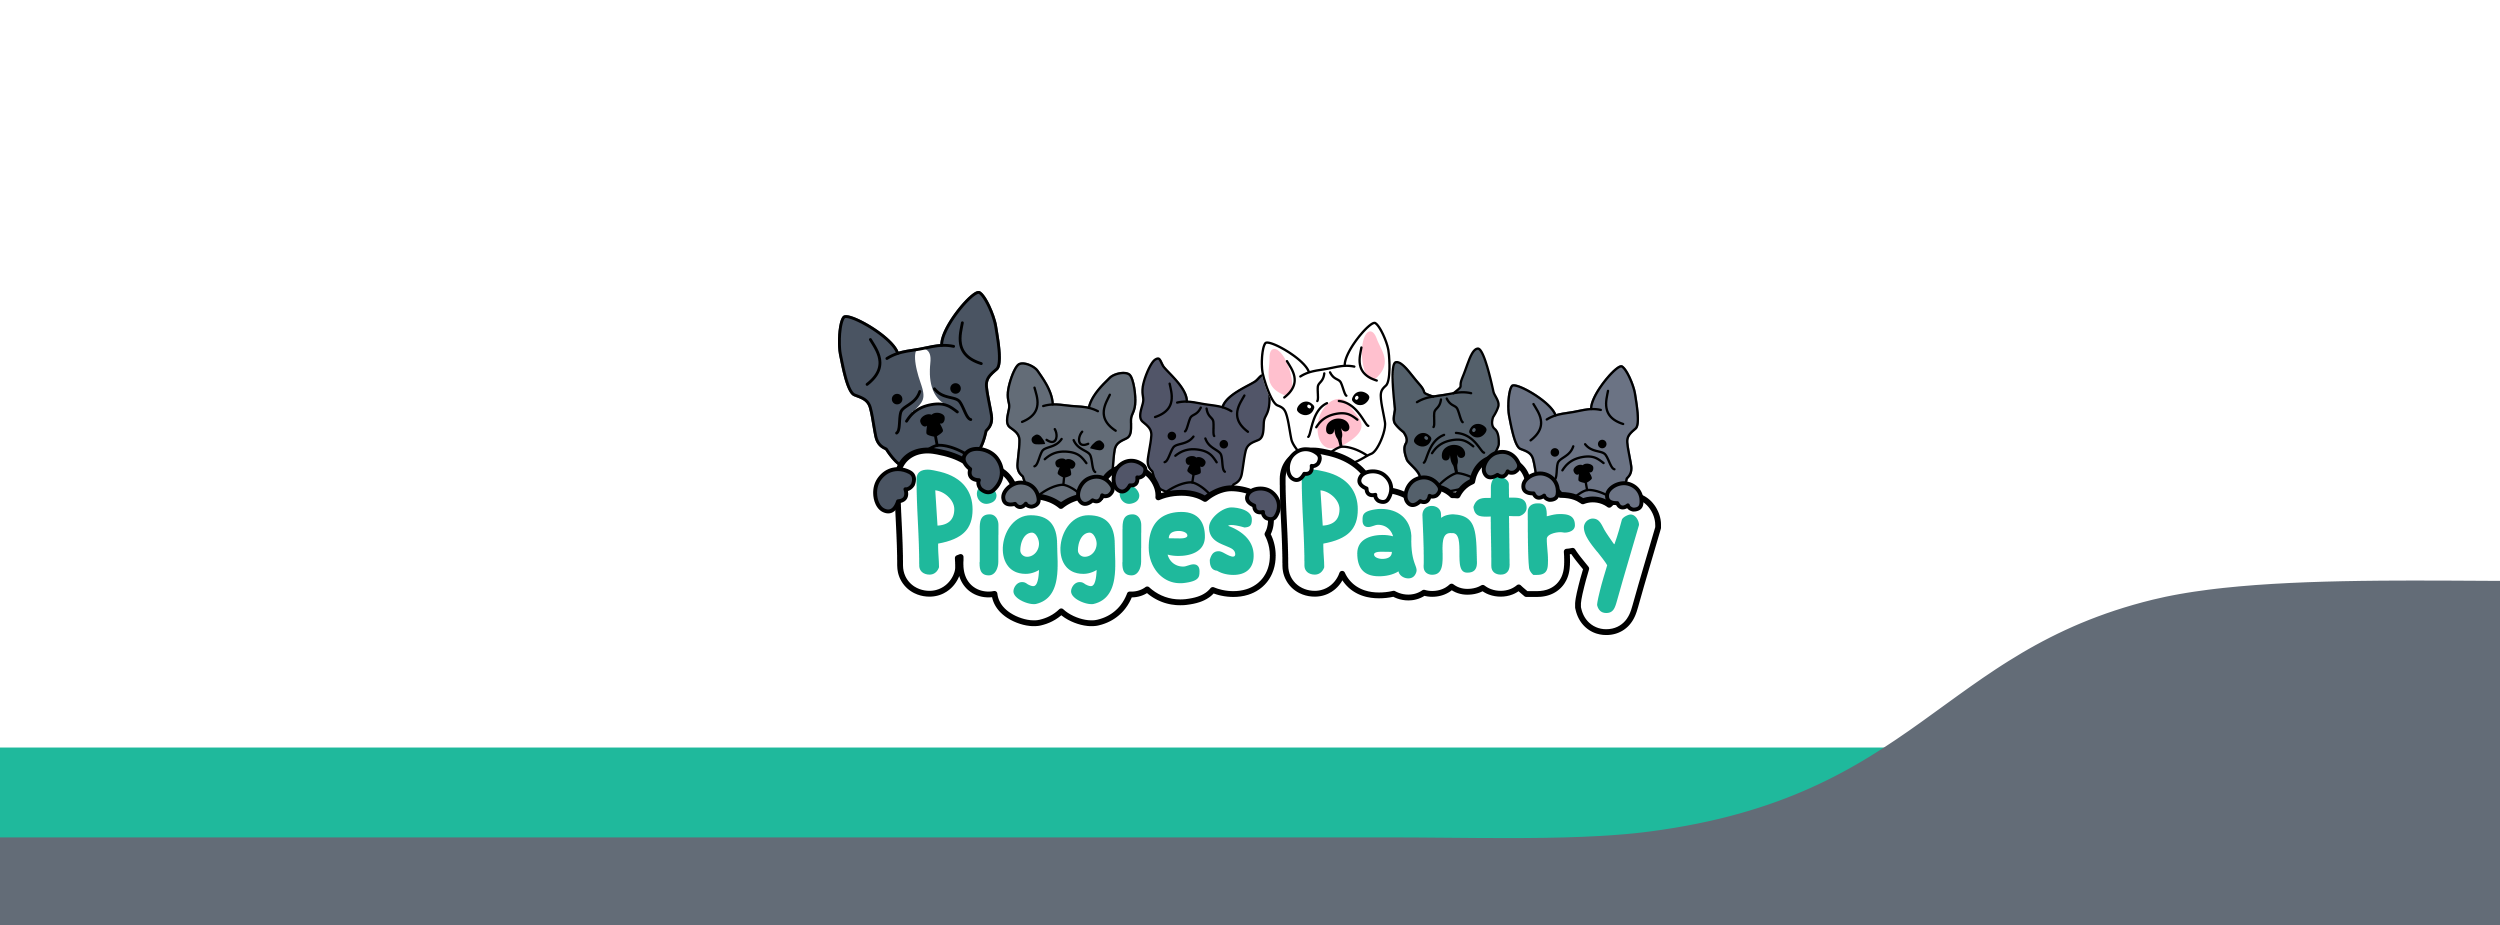 image is of six french bulldogs over the words Piggies Pantry